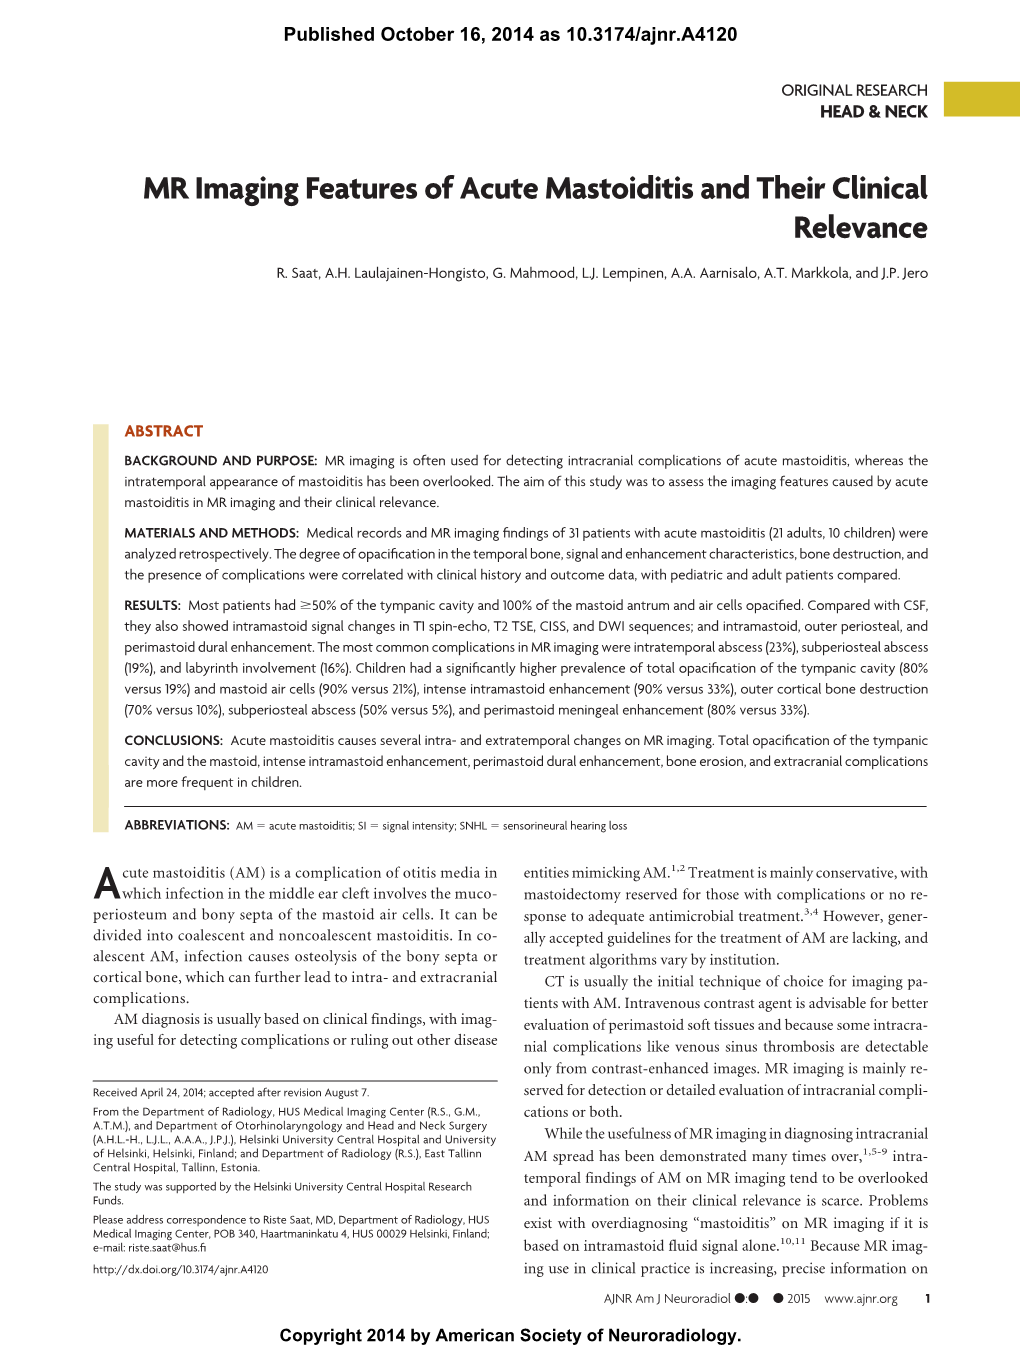 MR Imaging Features of Acute Mastoiditis and Their Clinical Relevance